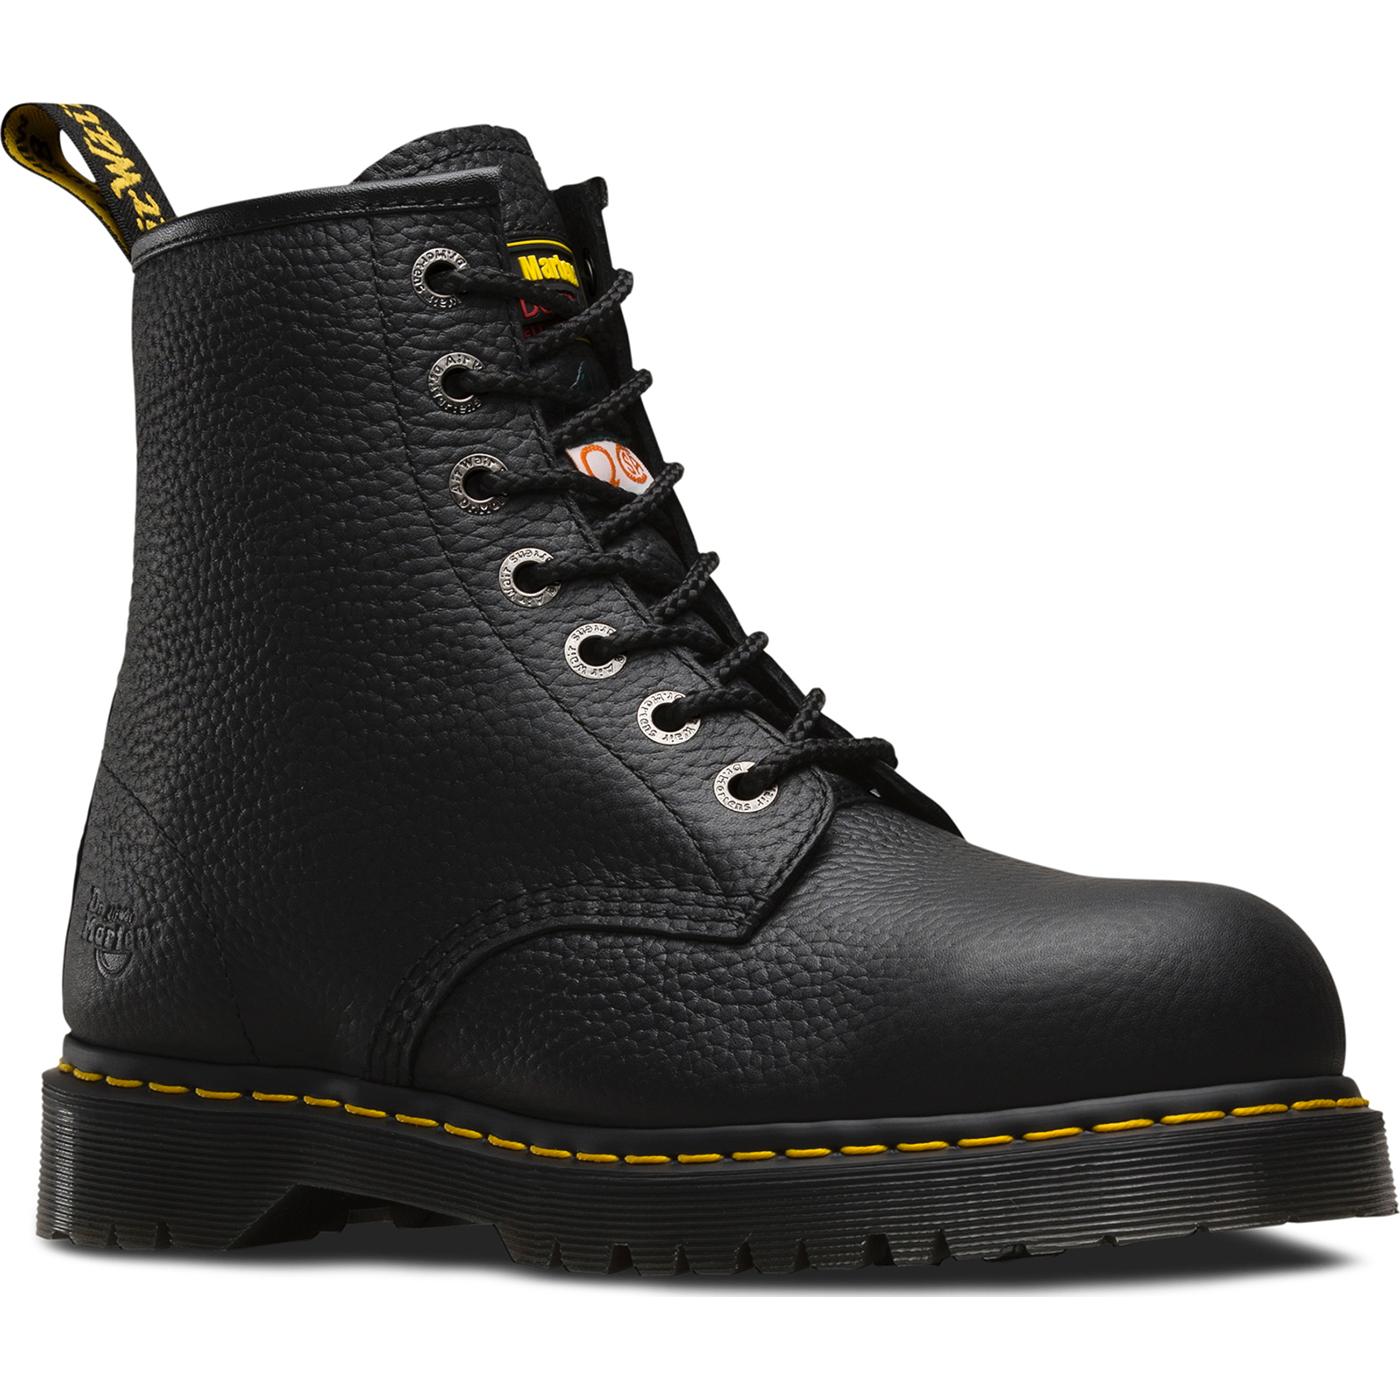 Dr. Martens Black Steel Toe CSA Puncture-Resistant Work Boot